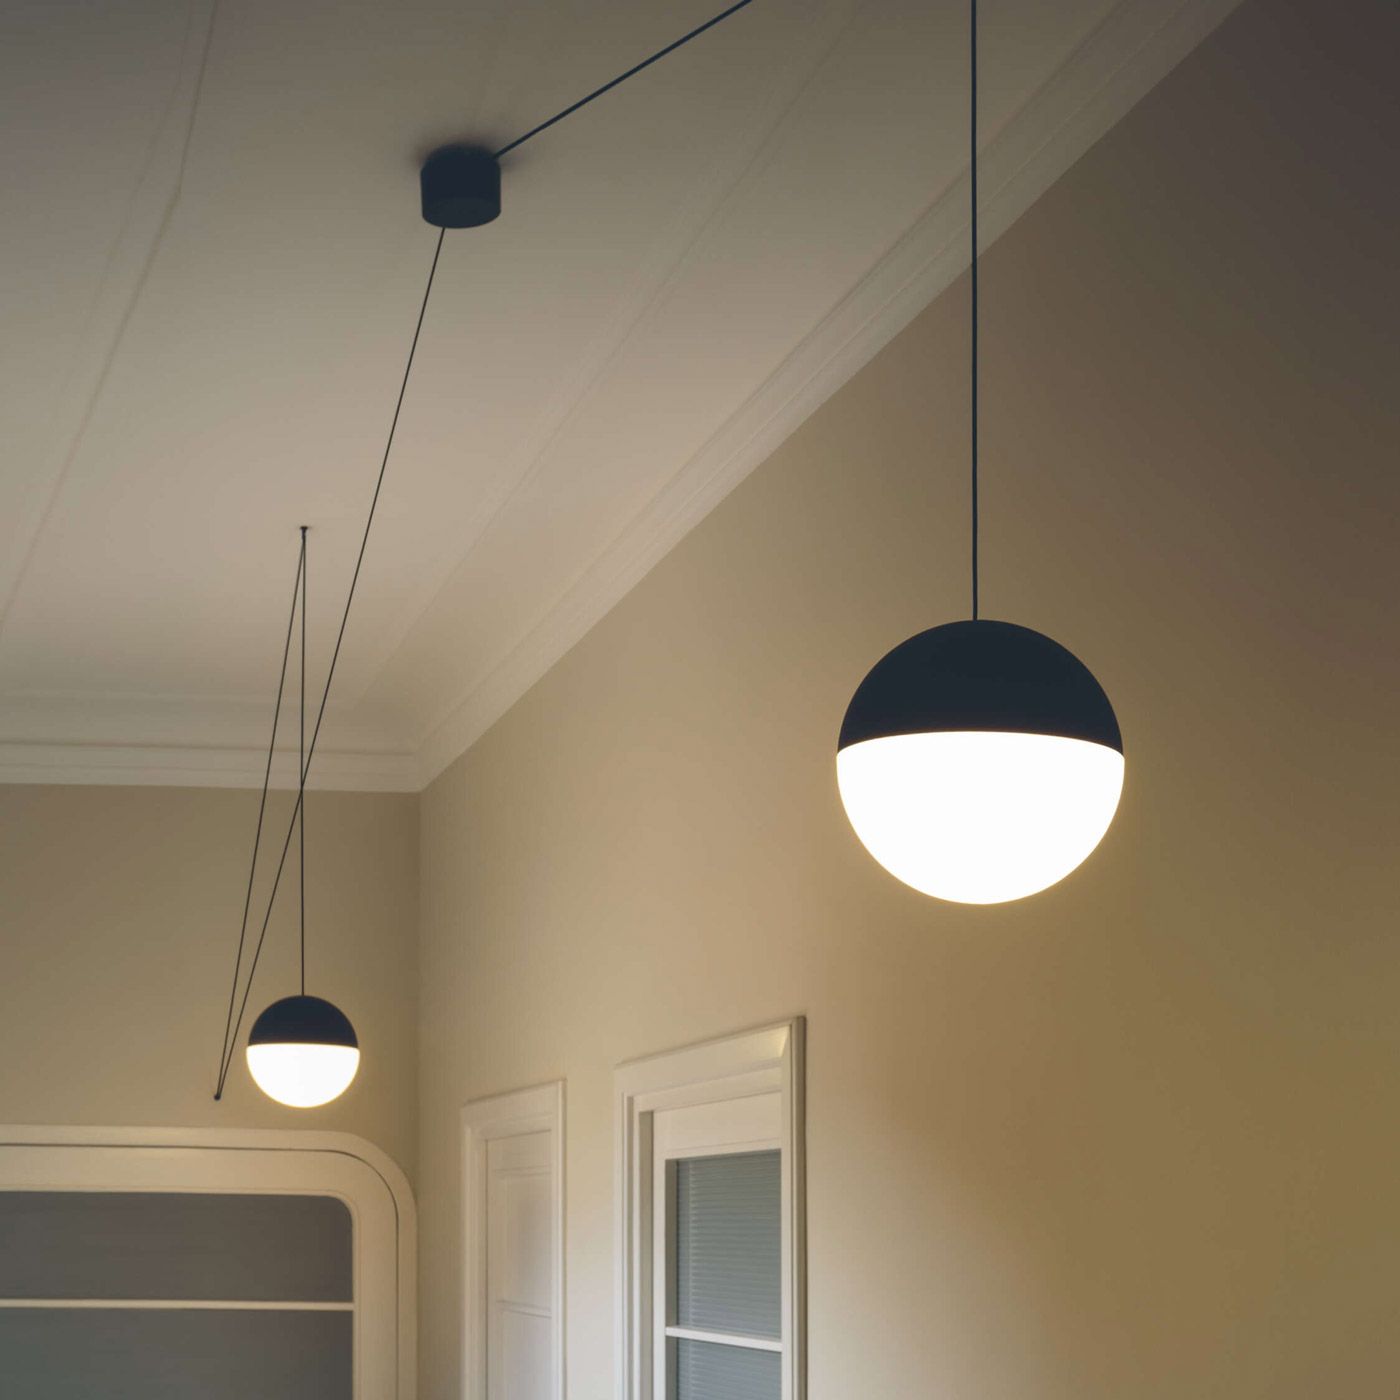 Flos String Light Ball Head Pendant Lamp 22m Black With Sensor Dimmer On Cable